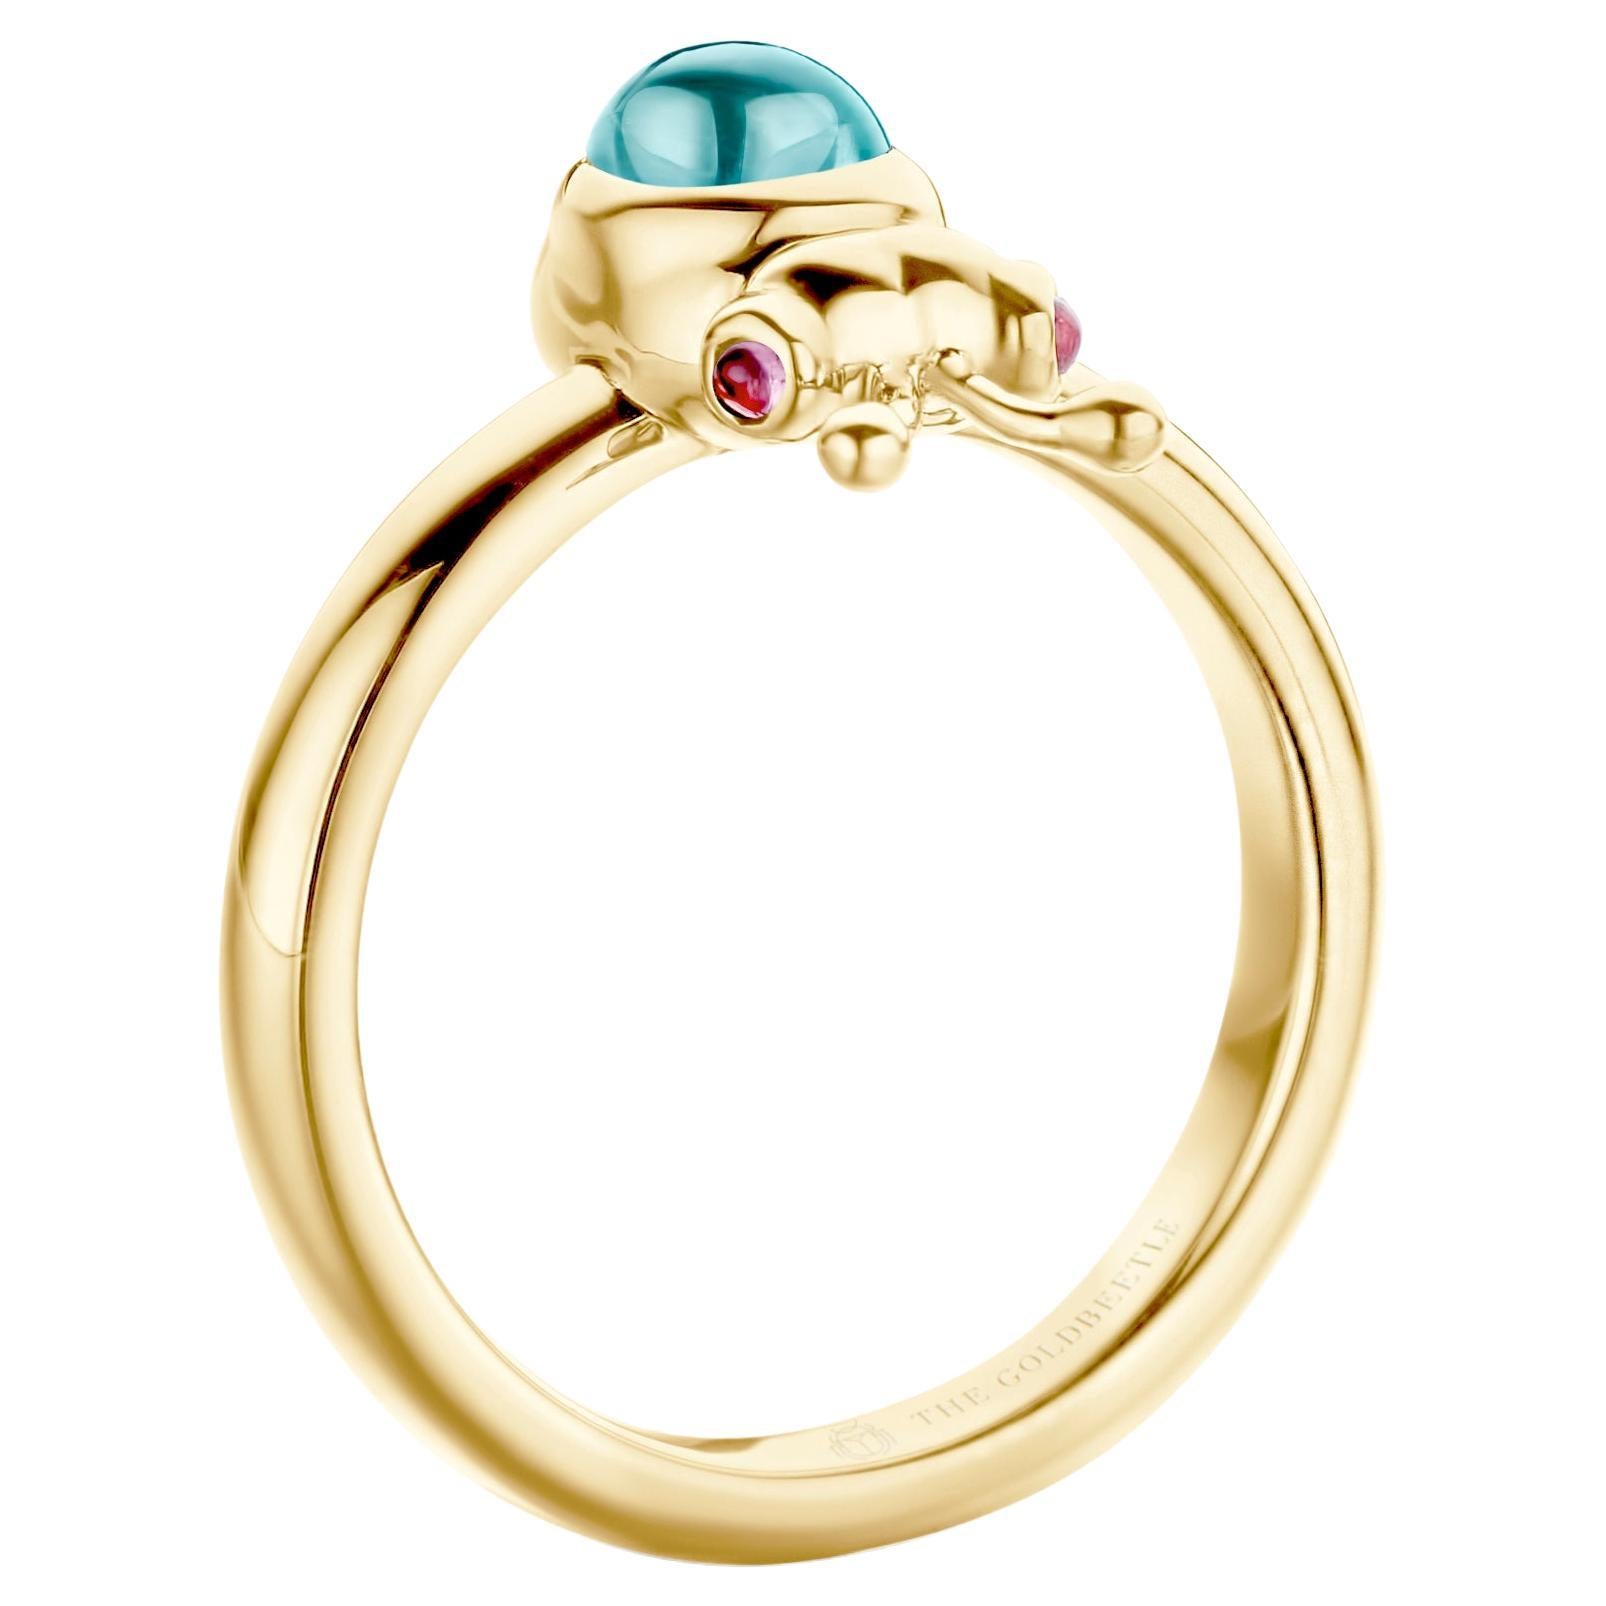 18-Karat yellow gold Lilou ring set with one natural aquamarine pear-shaped cabochon and two natural pink tourmalines in round cabochon cut.
Celine Roelens, a goldsmith and gemologist, specializes in unique, fine jewelry, handmade in Belgium and